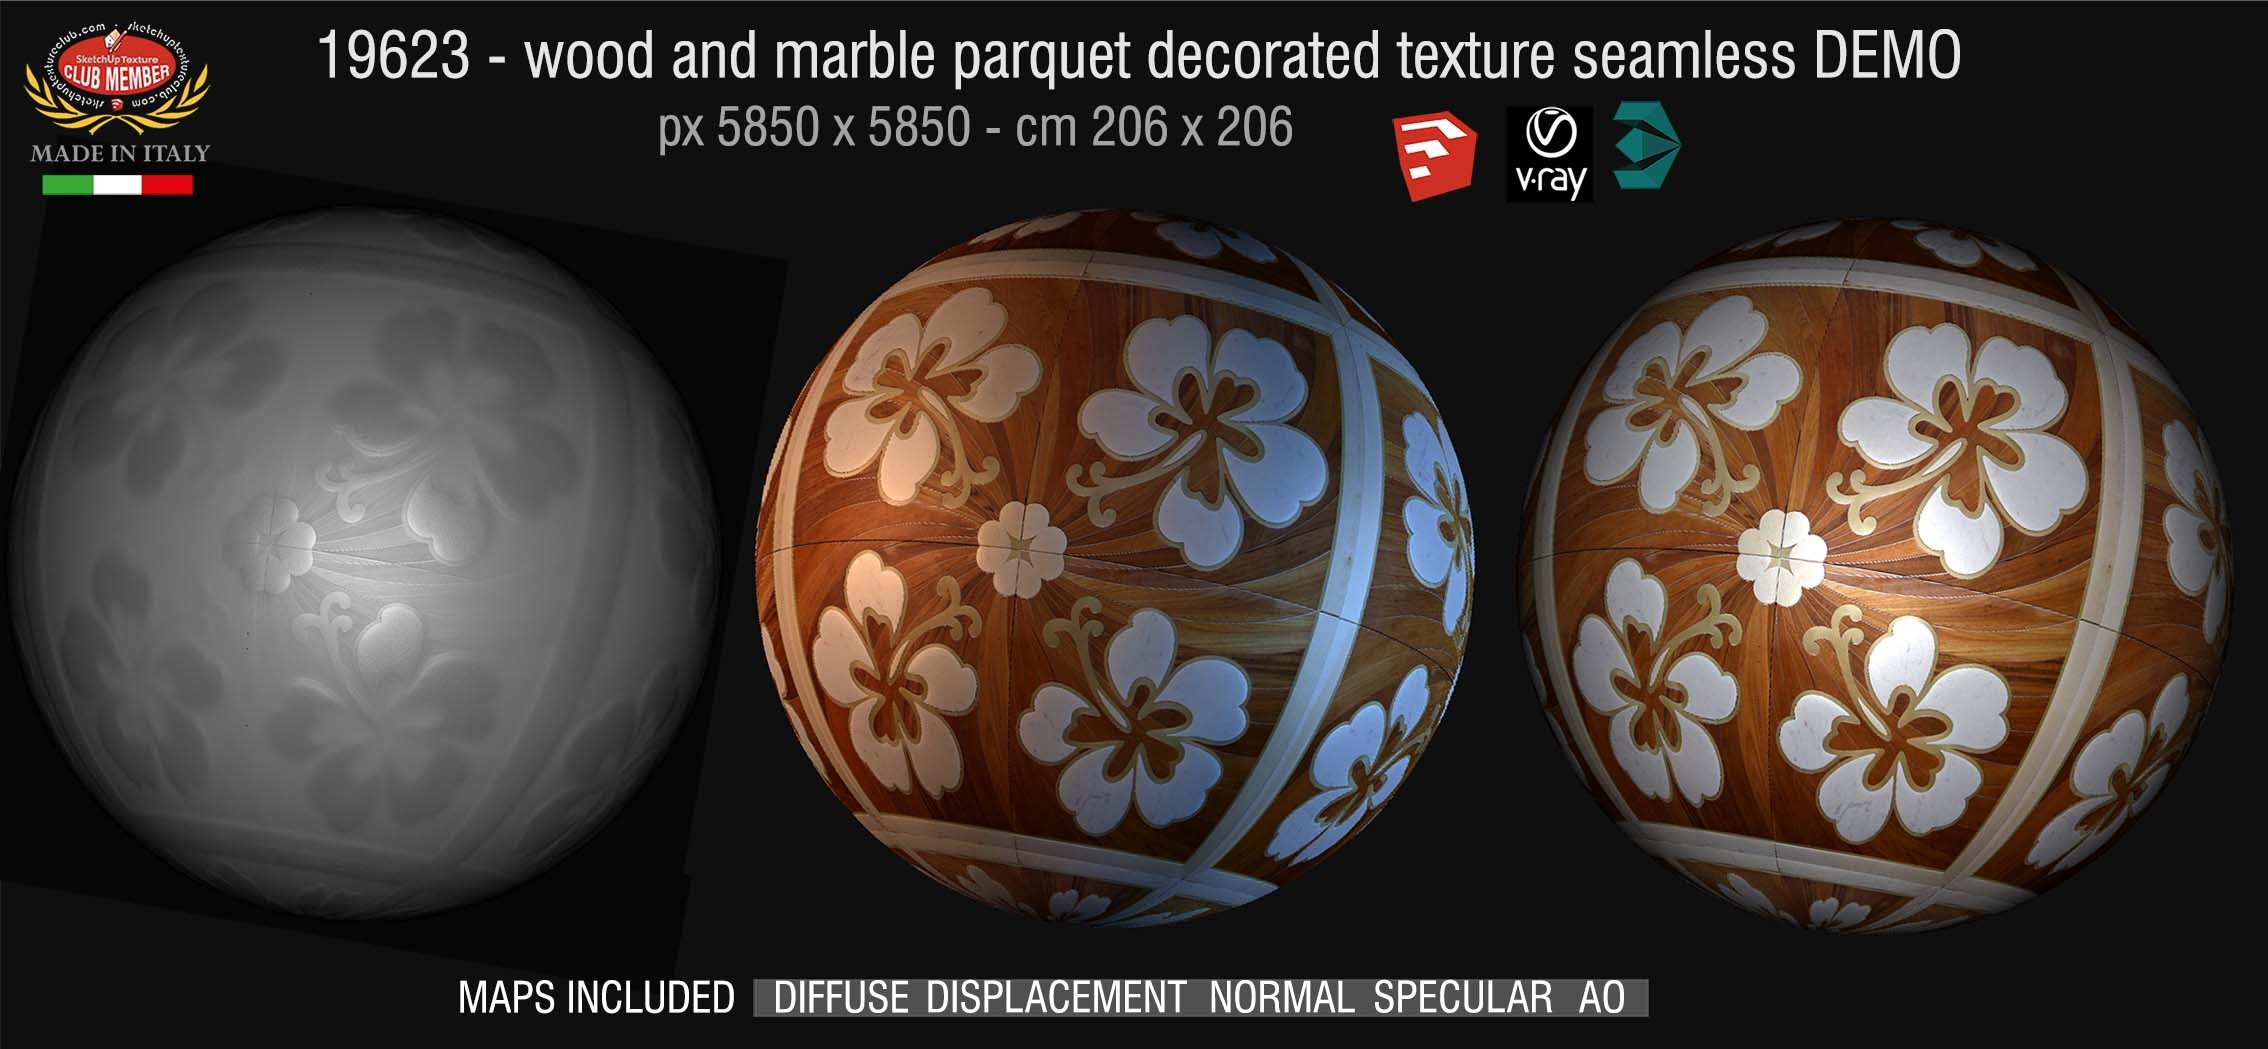 19623 HR Wood & marble parquet decorated texture seamless + maps DEMO